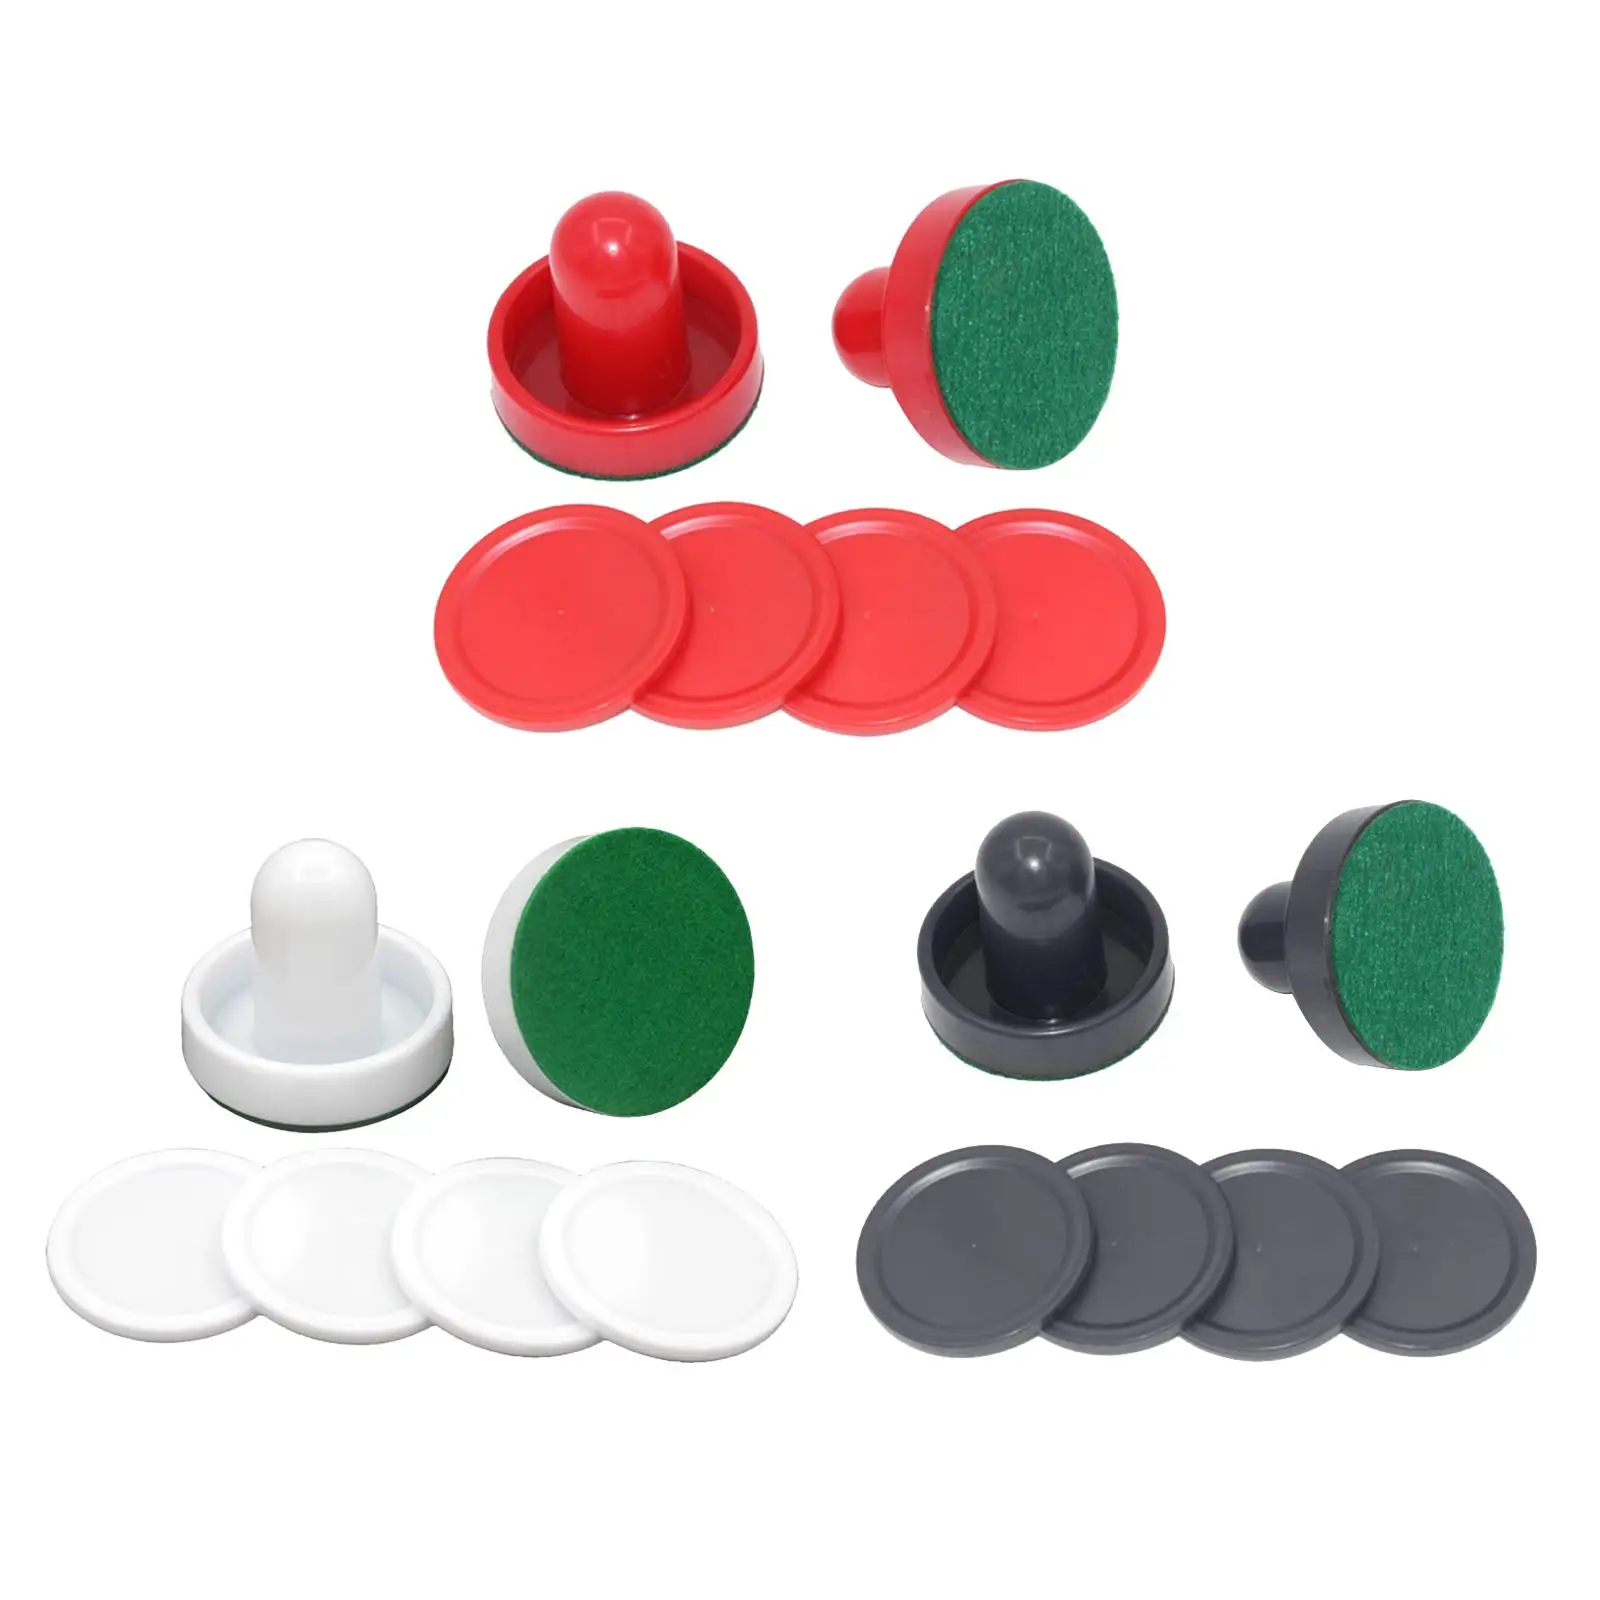 2PCS  Pushers and 4PCS Pucks Game Tables Goalies Equipment Accessories